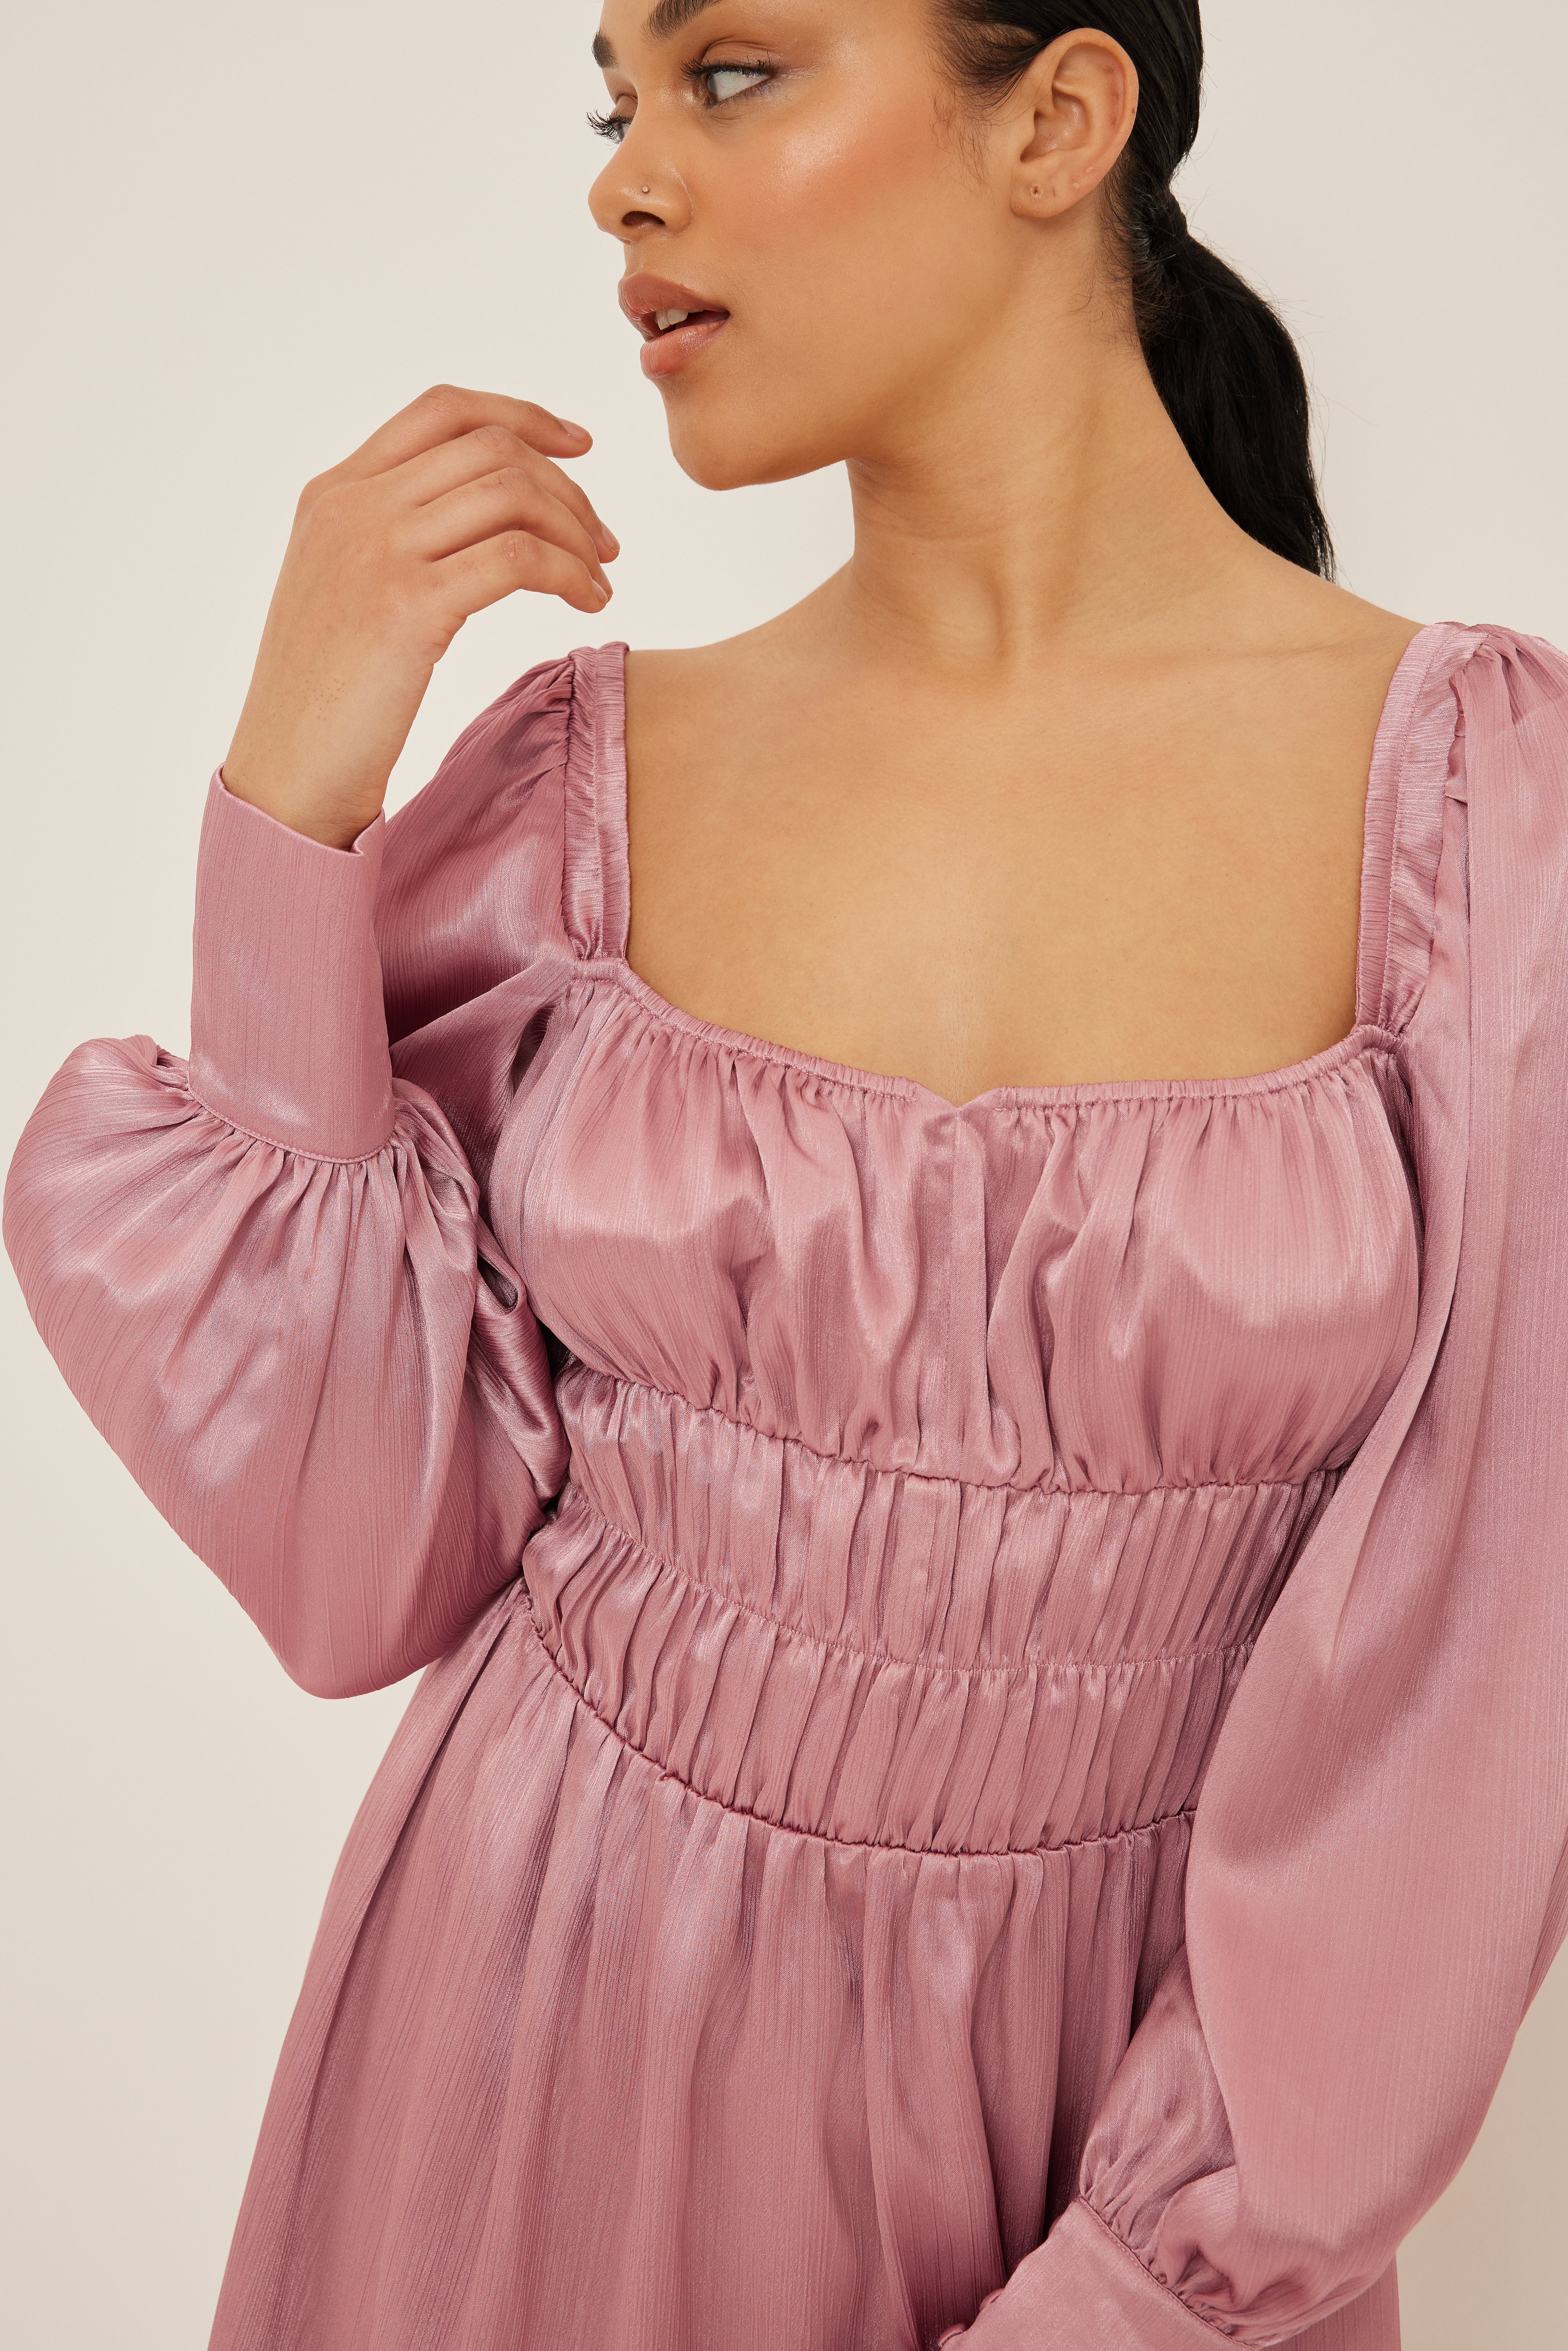 Dusty Pink Cups Detail Structured Satin Mini Dress